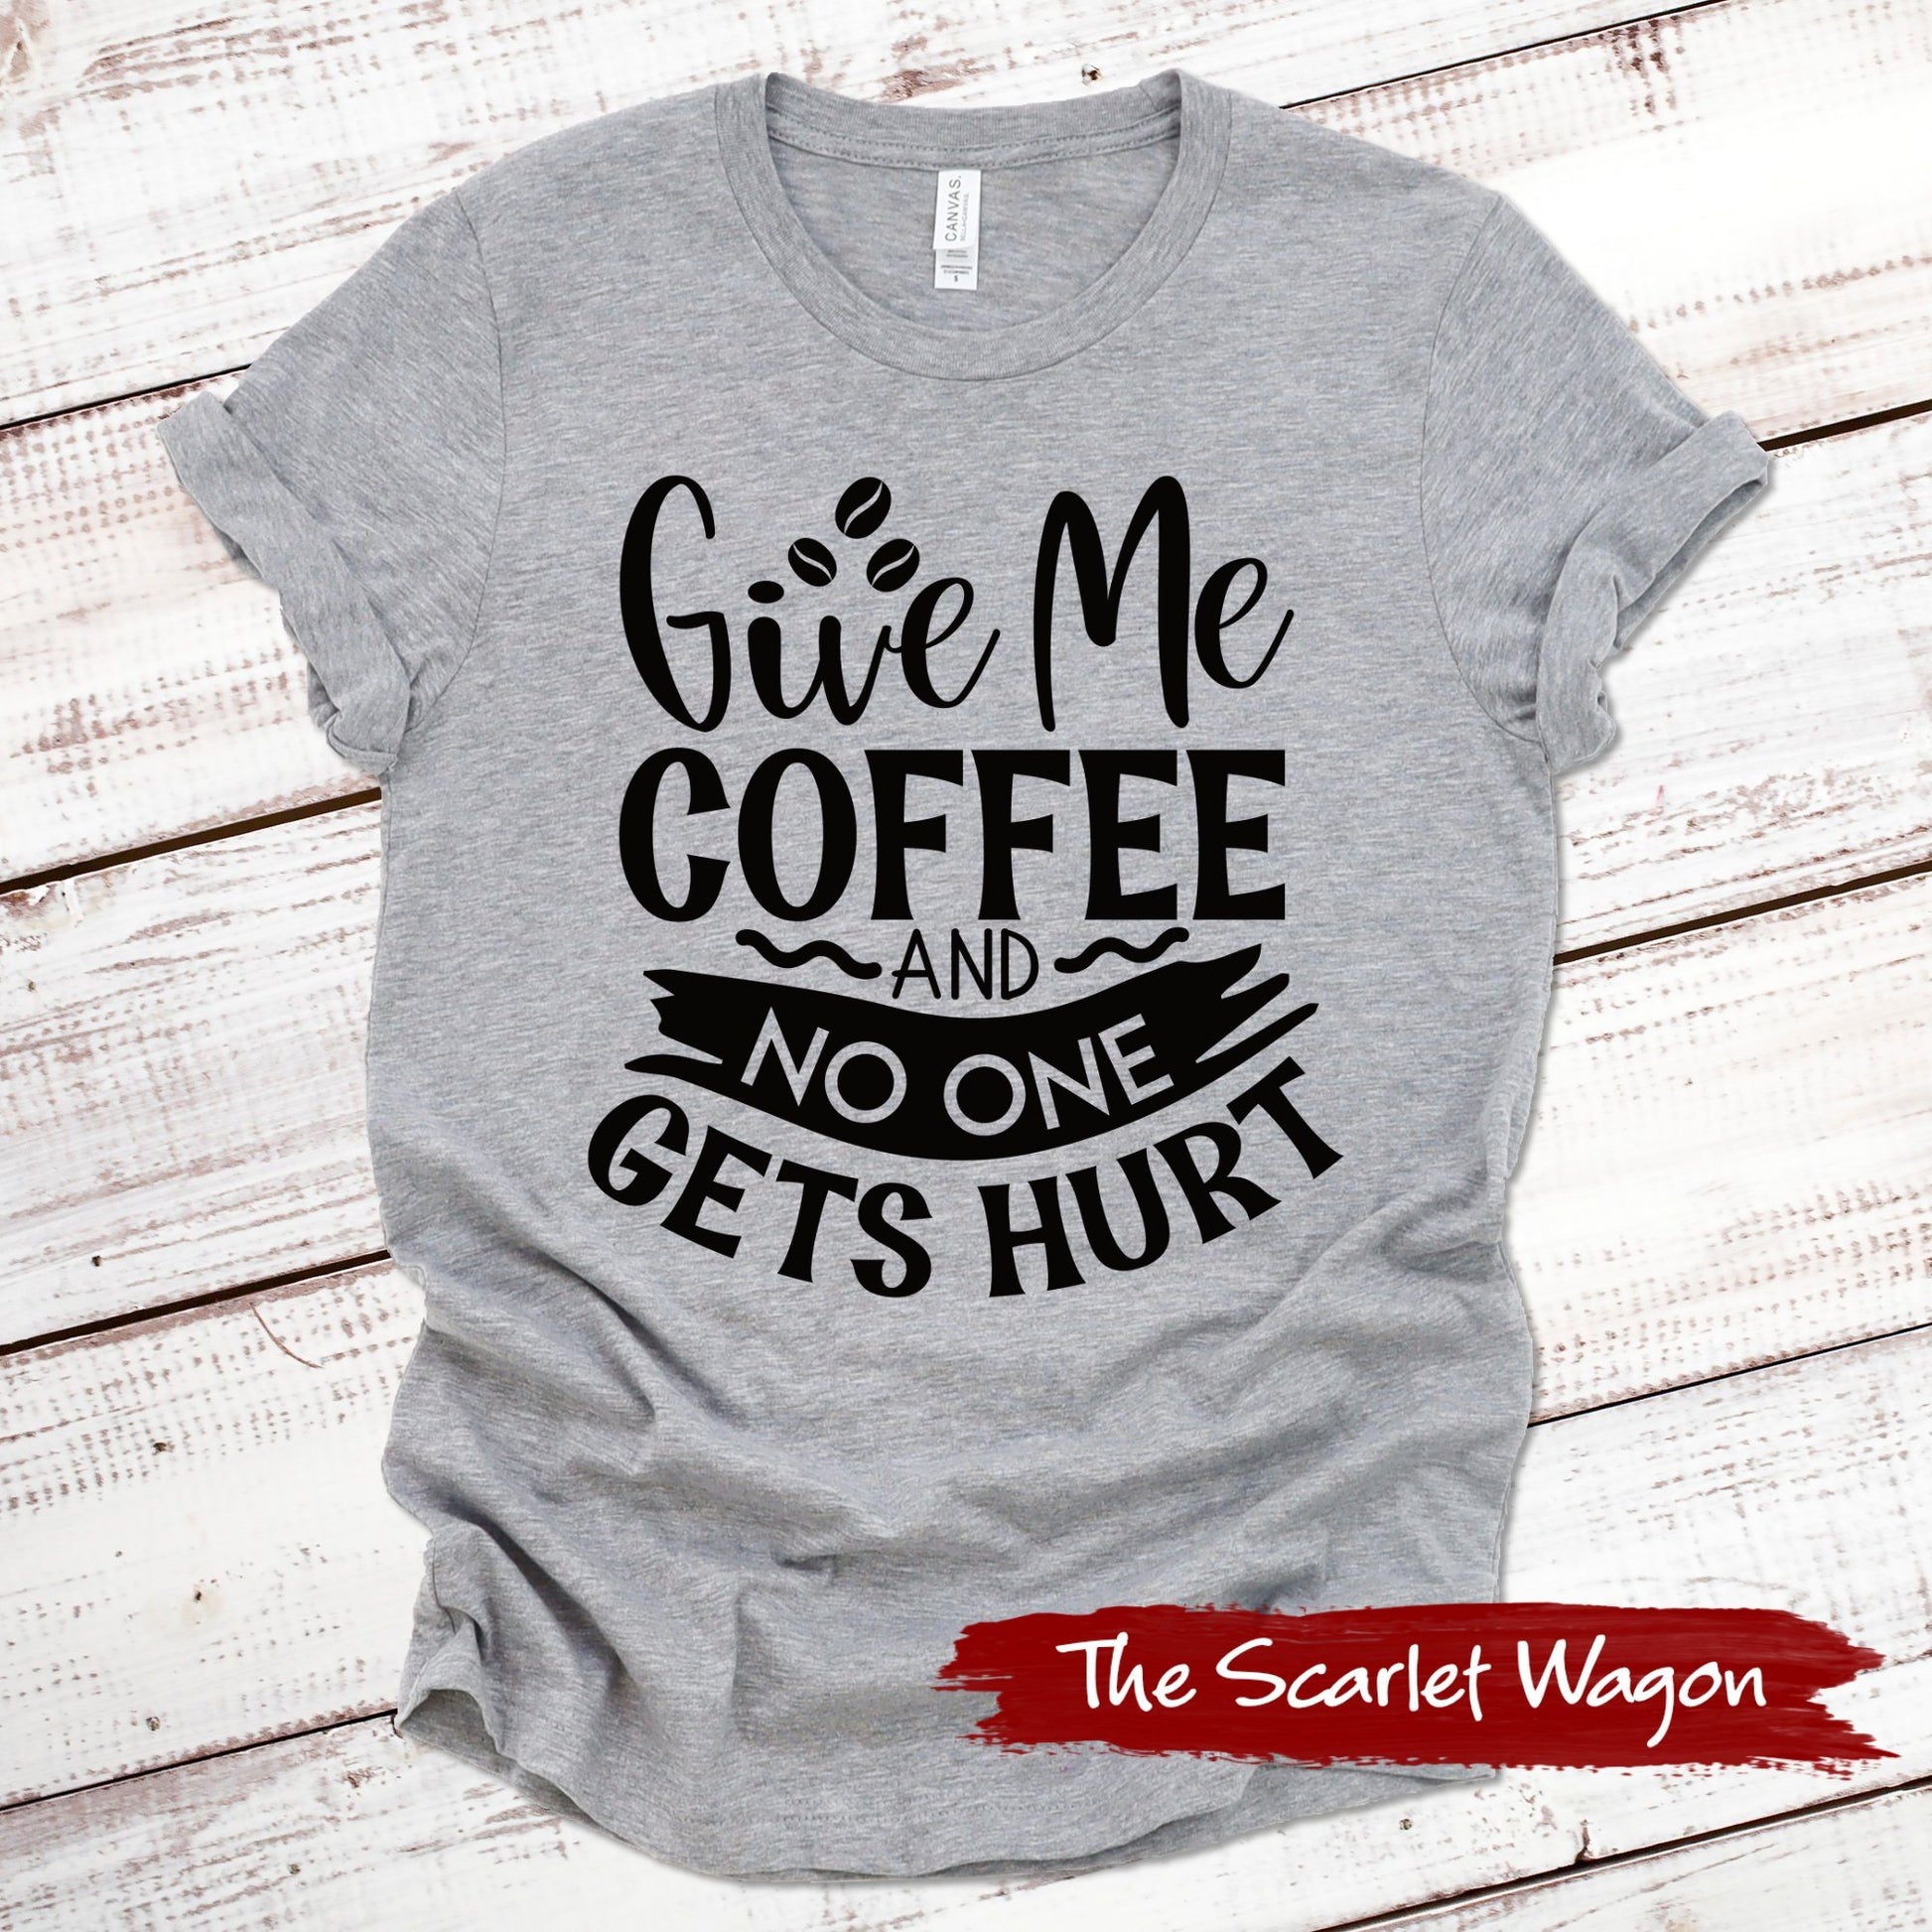 Give Me Coffee and No One Gets Hurt Funny Shirt Scarlet Wagon Athletic Heather XS 